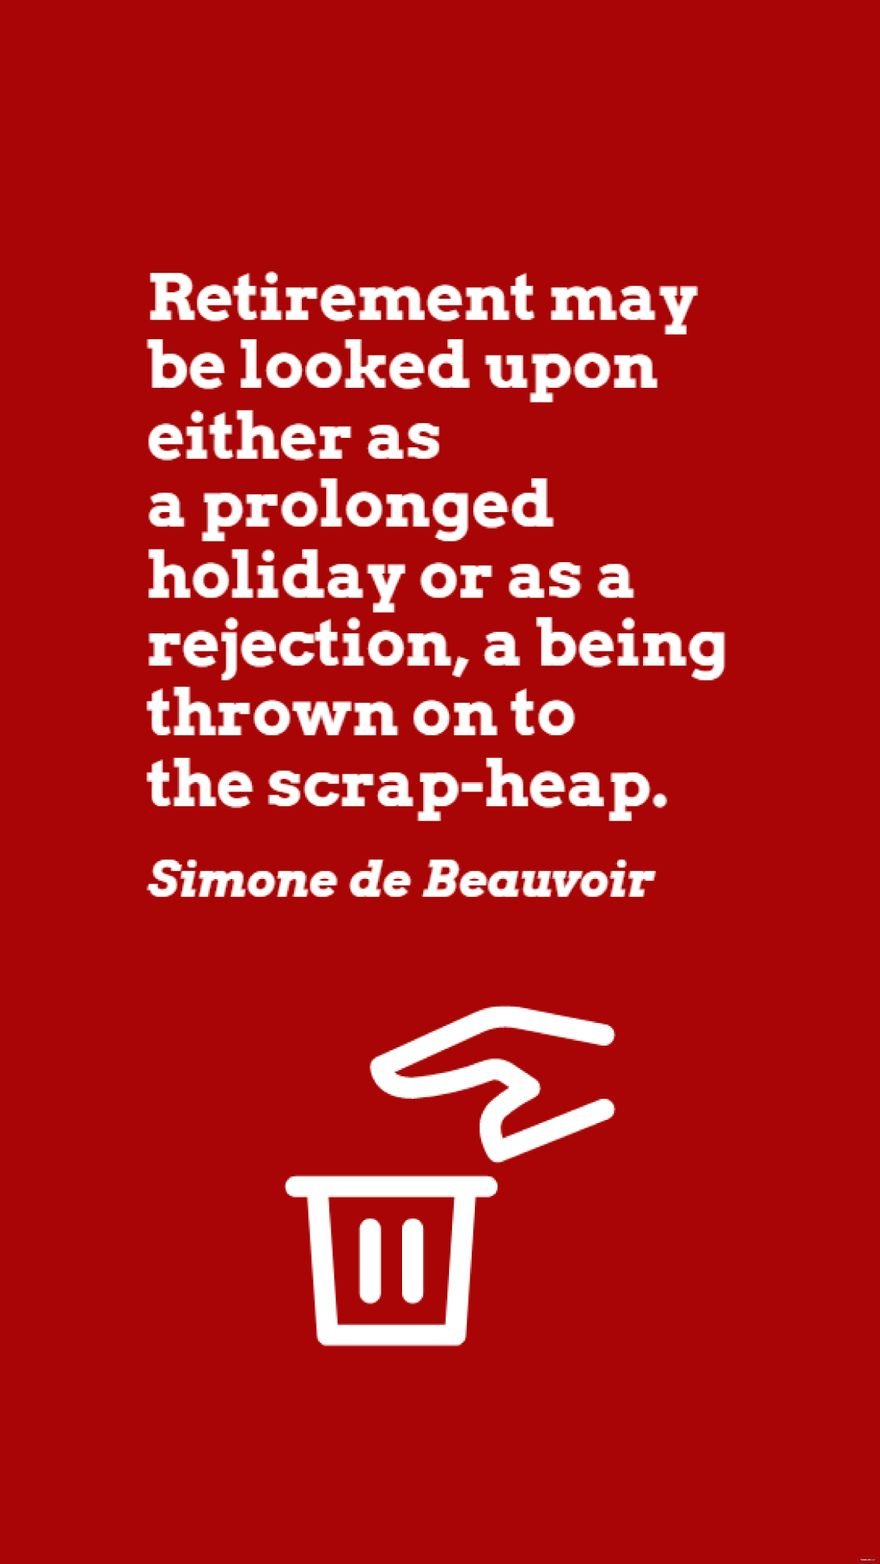 Free Simone de Beauvoir - Retirement may be looked upon either as a prolonged holiday or as a rejection, a being thrown on to the scrap-heap.